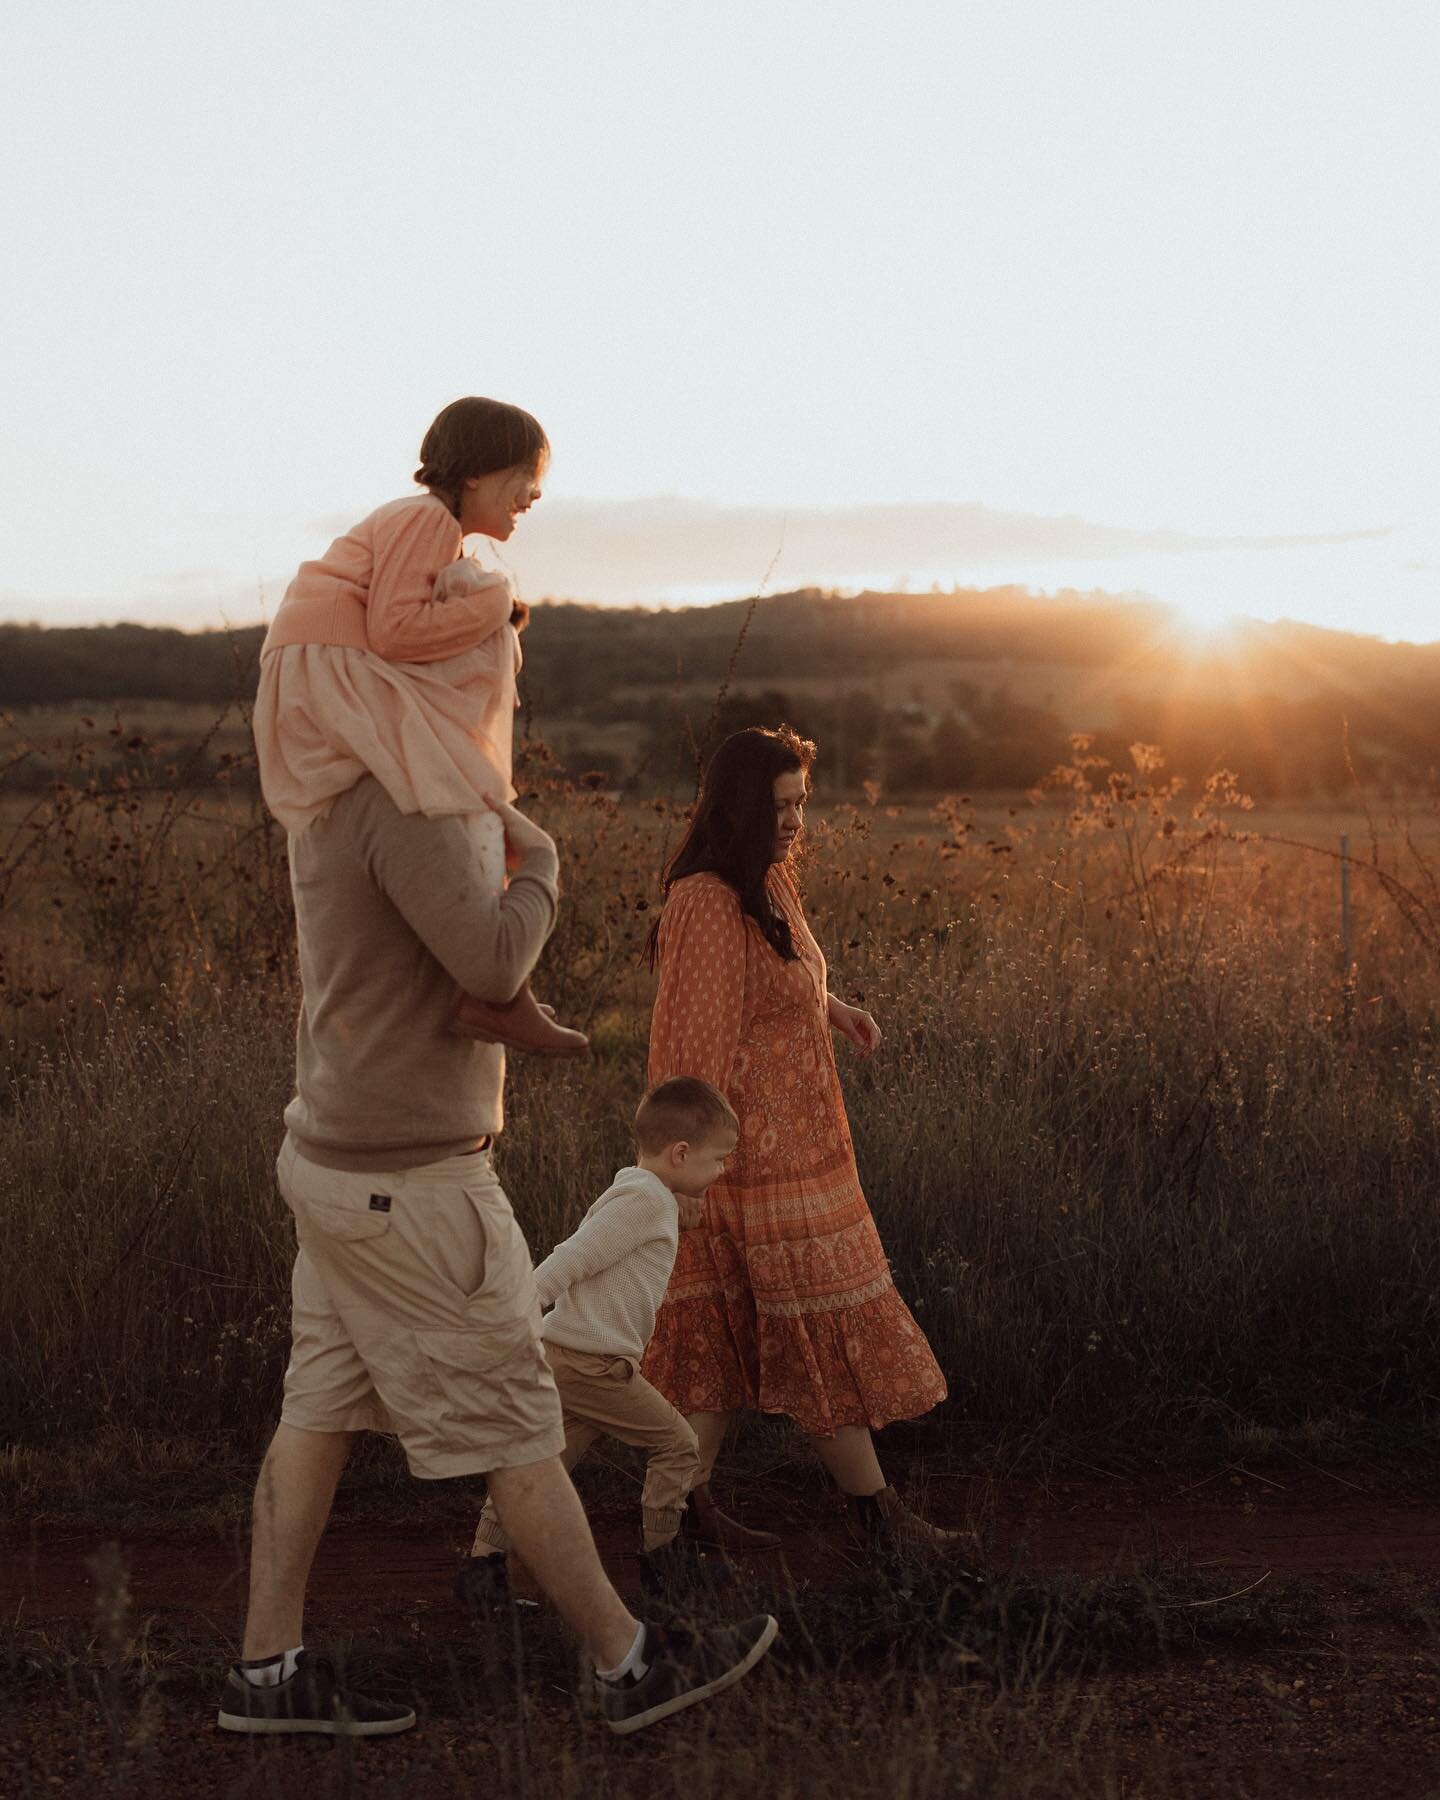 Family ✨

I hope it&rsquo;s been an enjoyable long weekend for everyone in Australia. I got to meet this gorgeous family all the way from Newcastle. It was a super cold afternoon but golden hour came through for us 🌅 🥰

#erinnredfernphotography 
#c